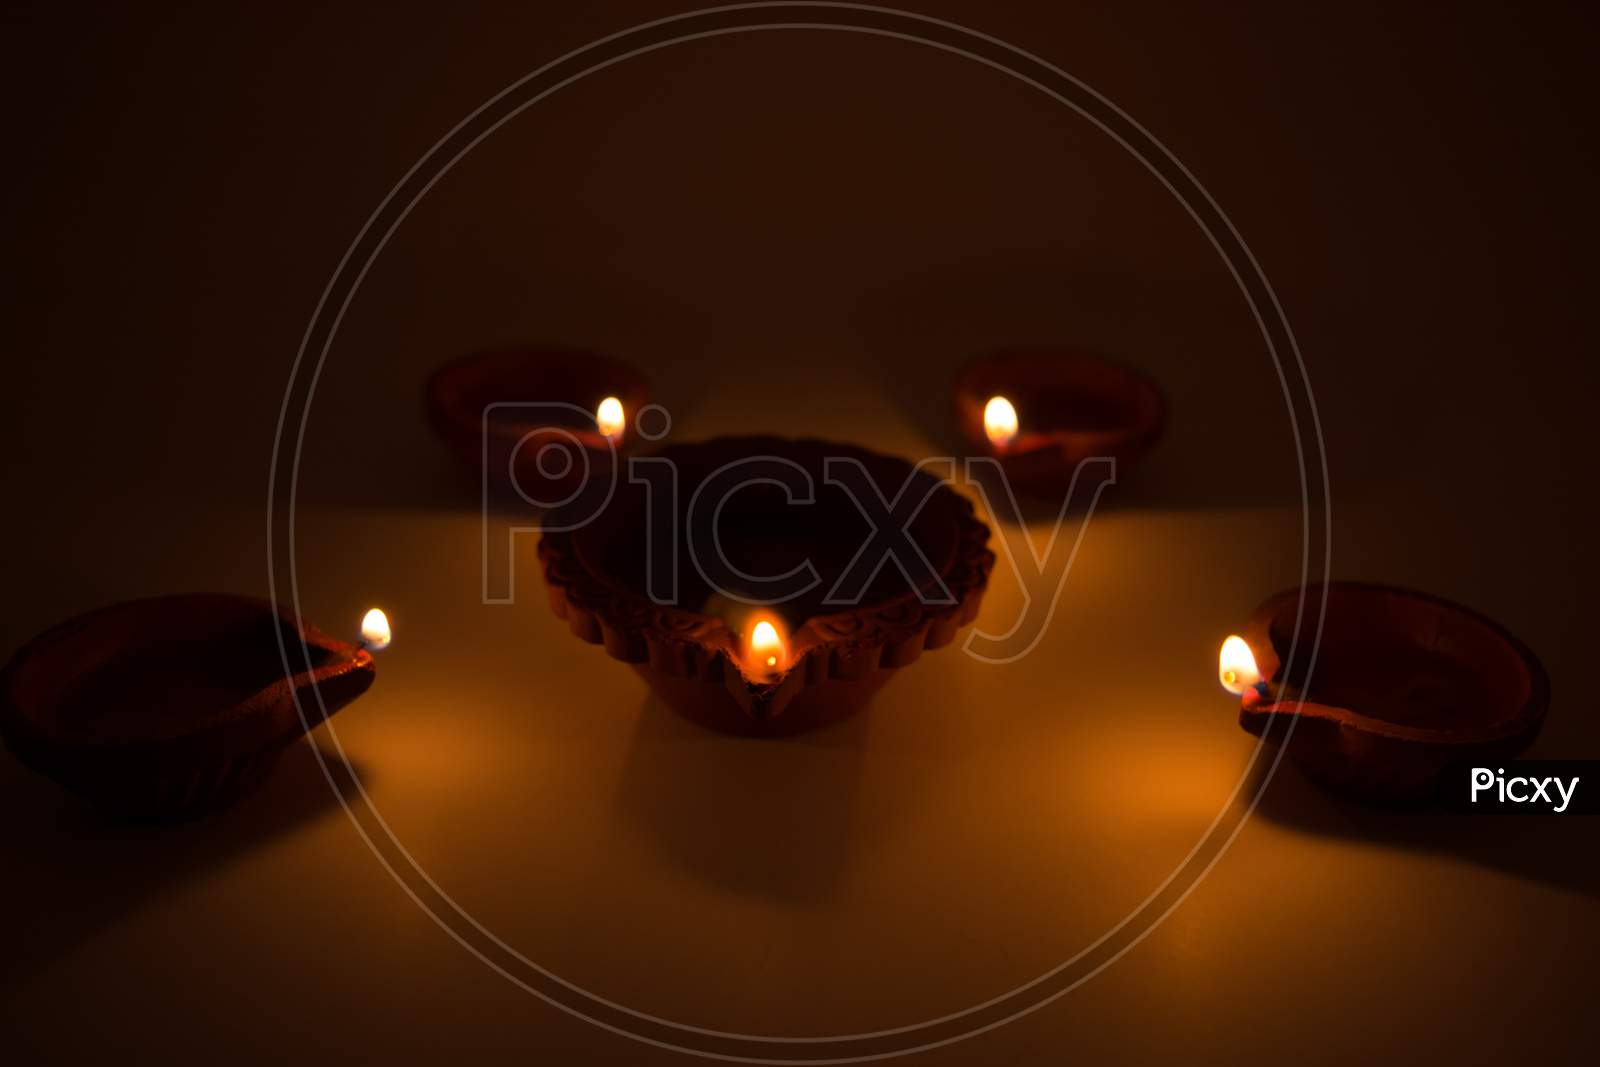 Diwali Terracotta Diyas On Dark Background Which Are Used Lighting Up The House During Diwali Times.